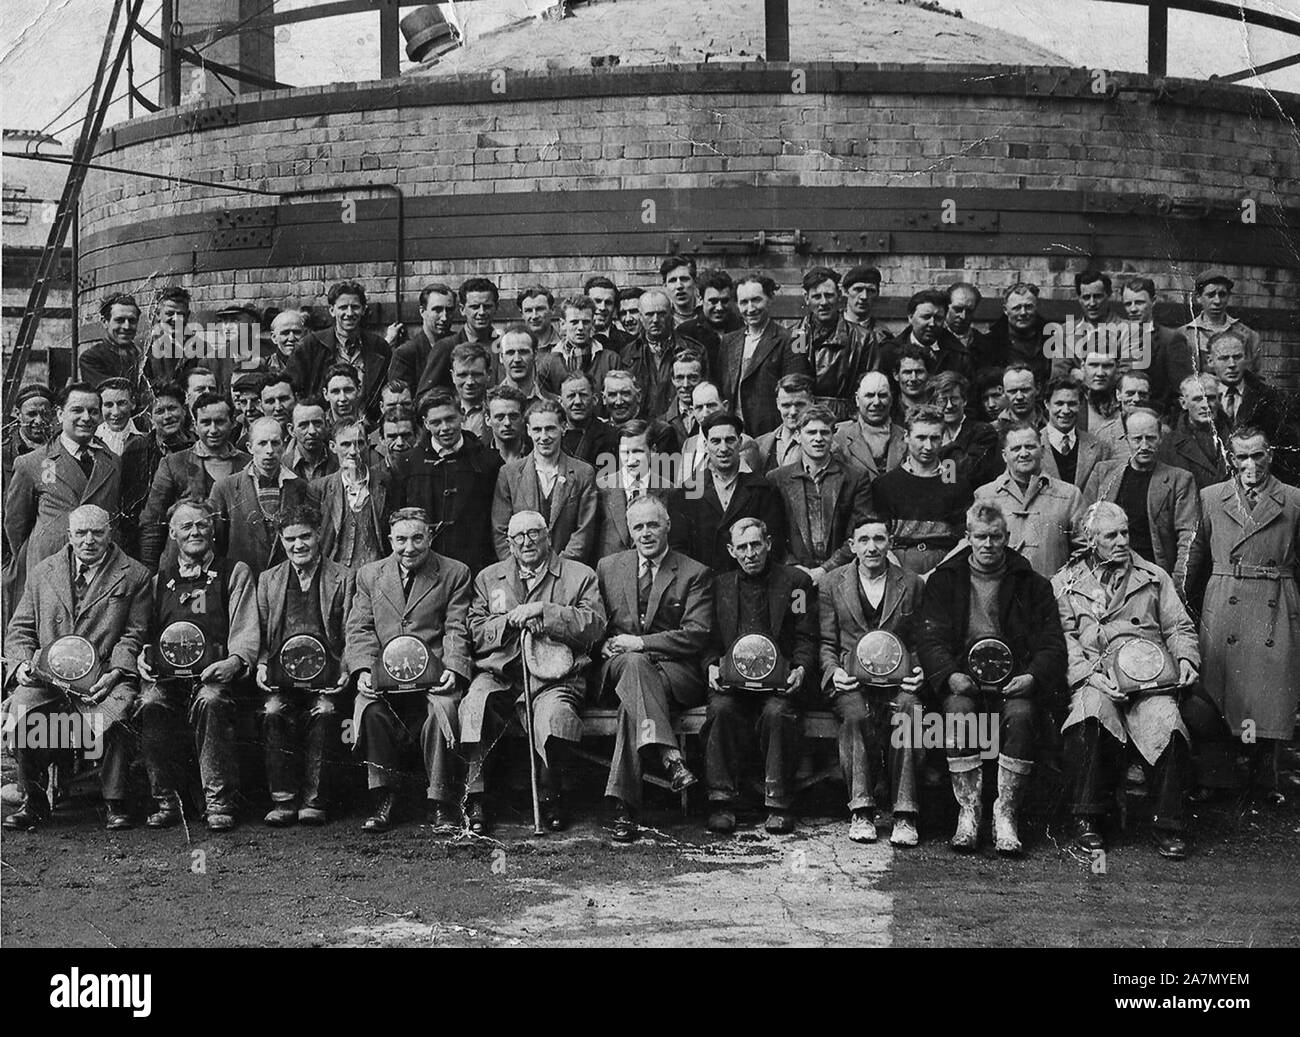 Workers long service staff group photograph Britain 1960 Doseley Pipe Works Stock Photo